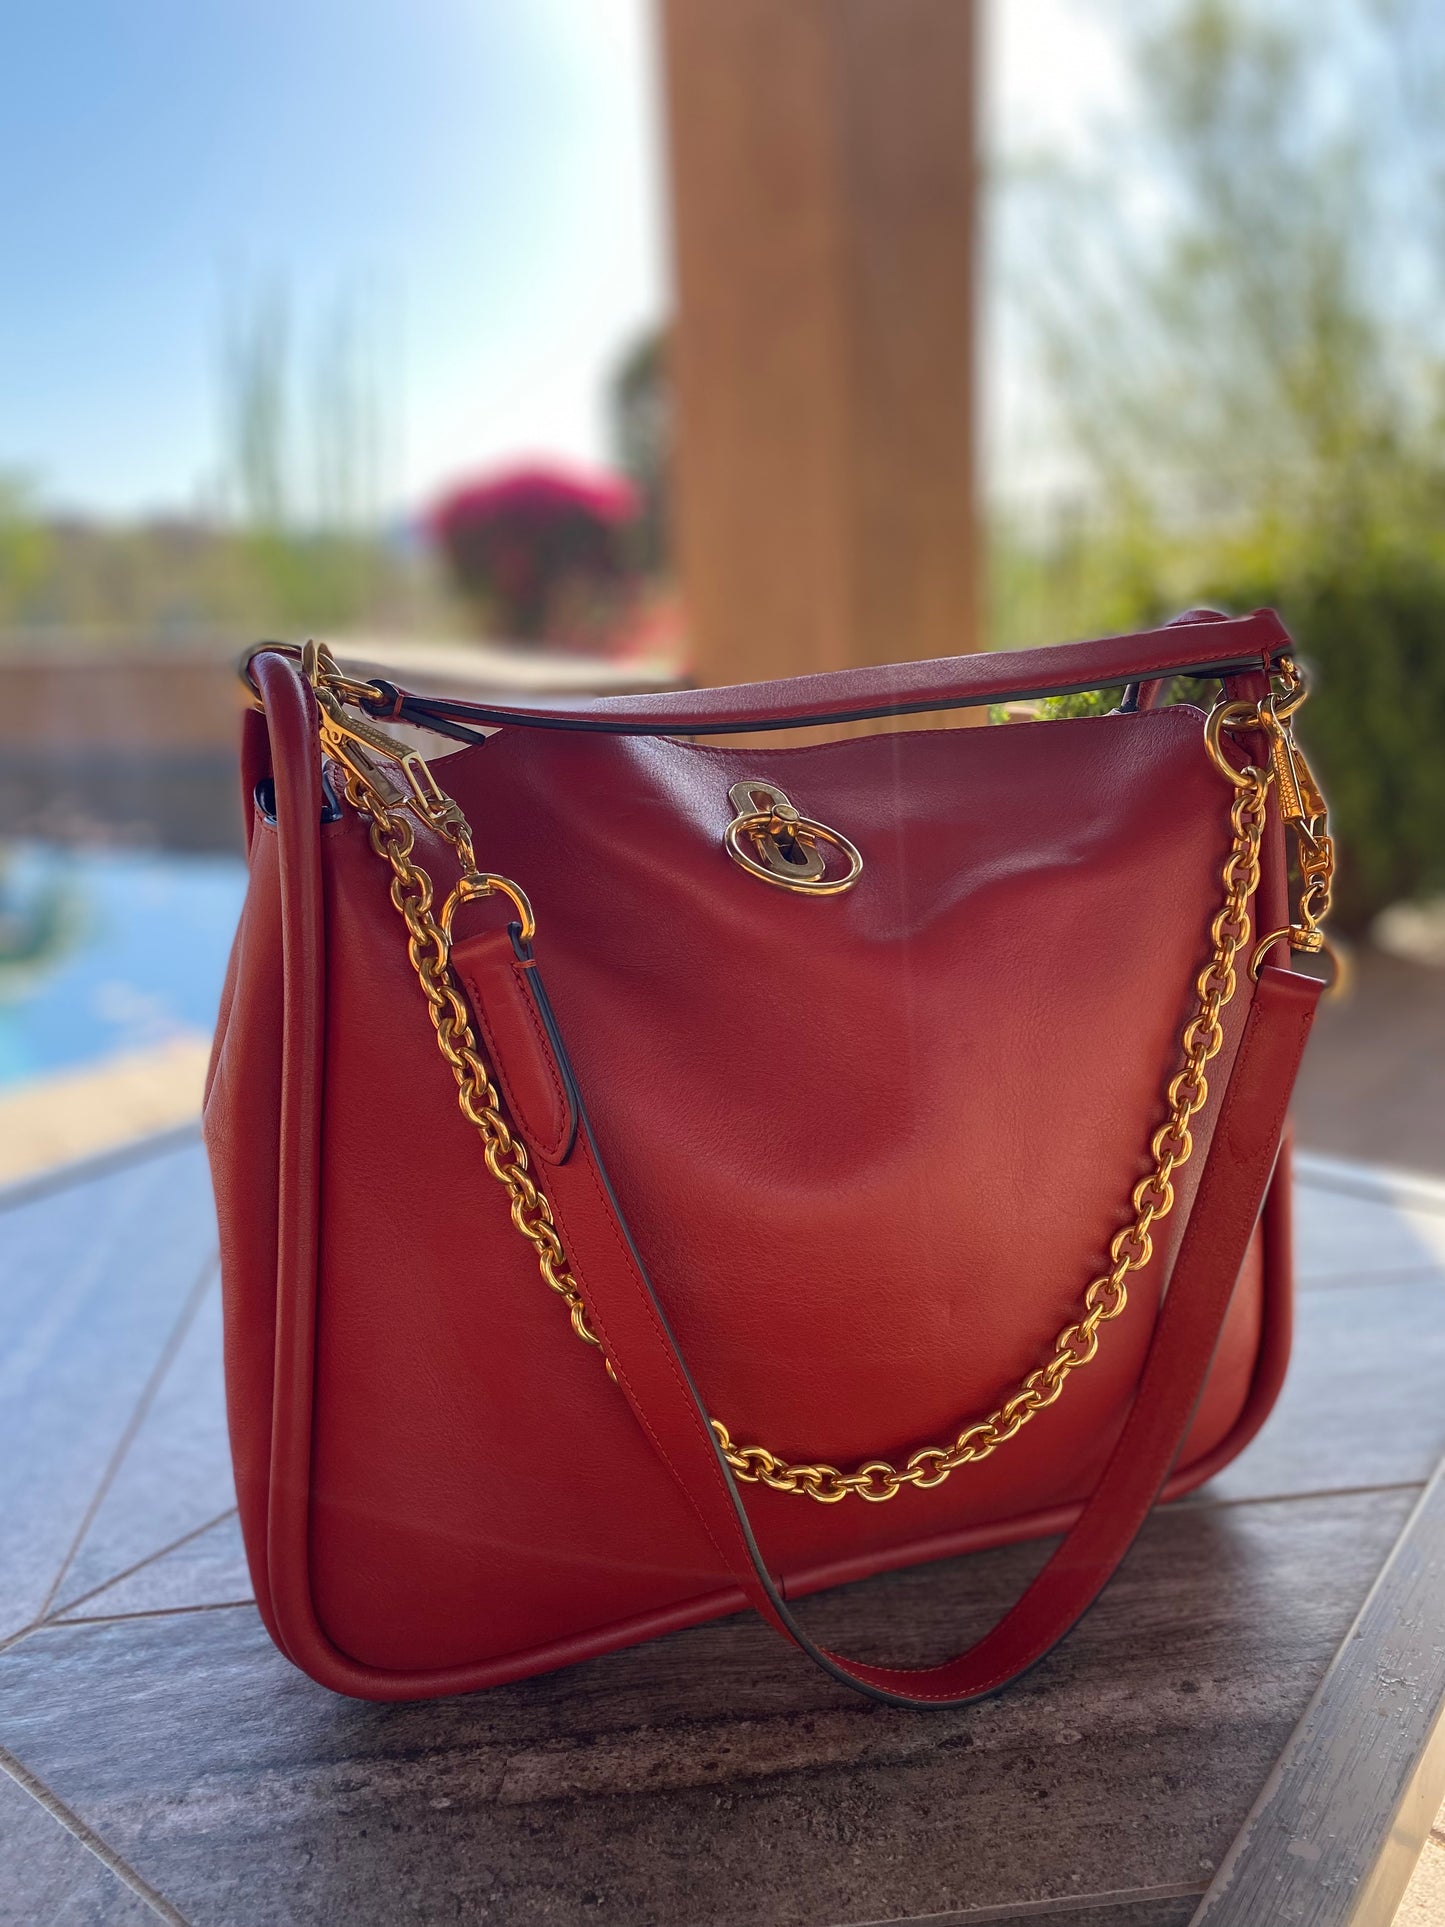 Mulberry Leighton Leather Hobo Shoulder Bag